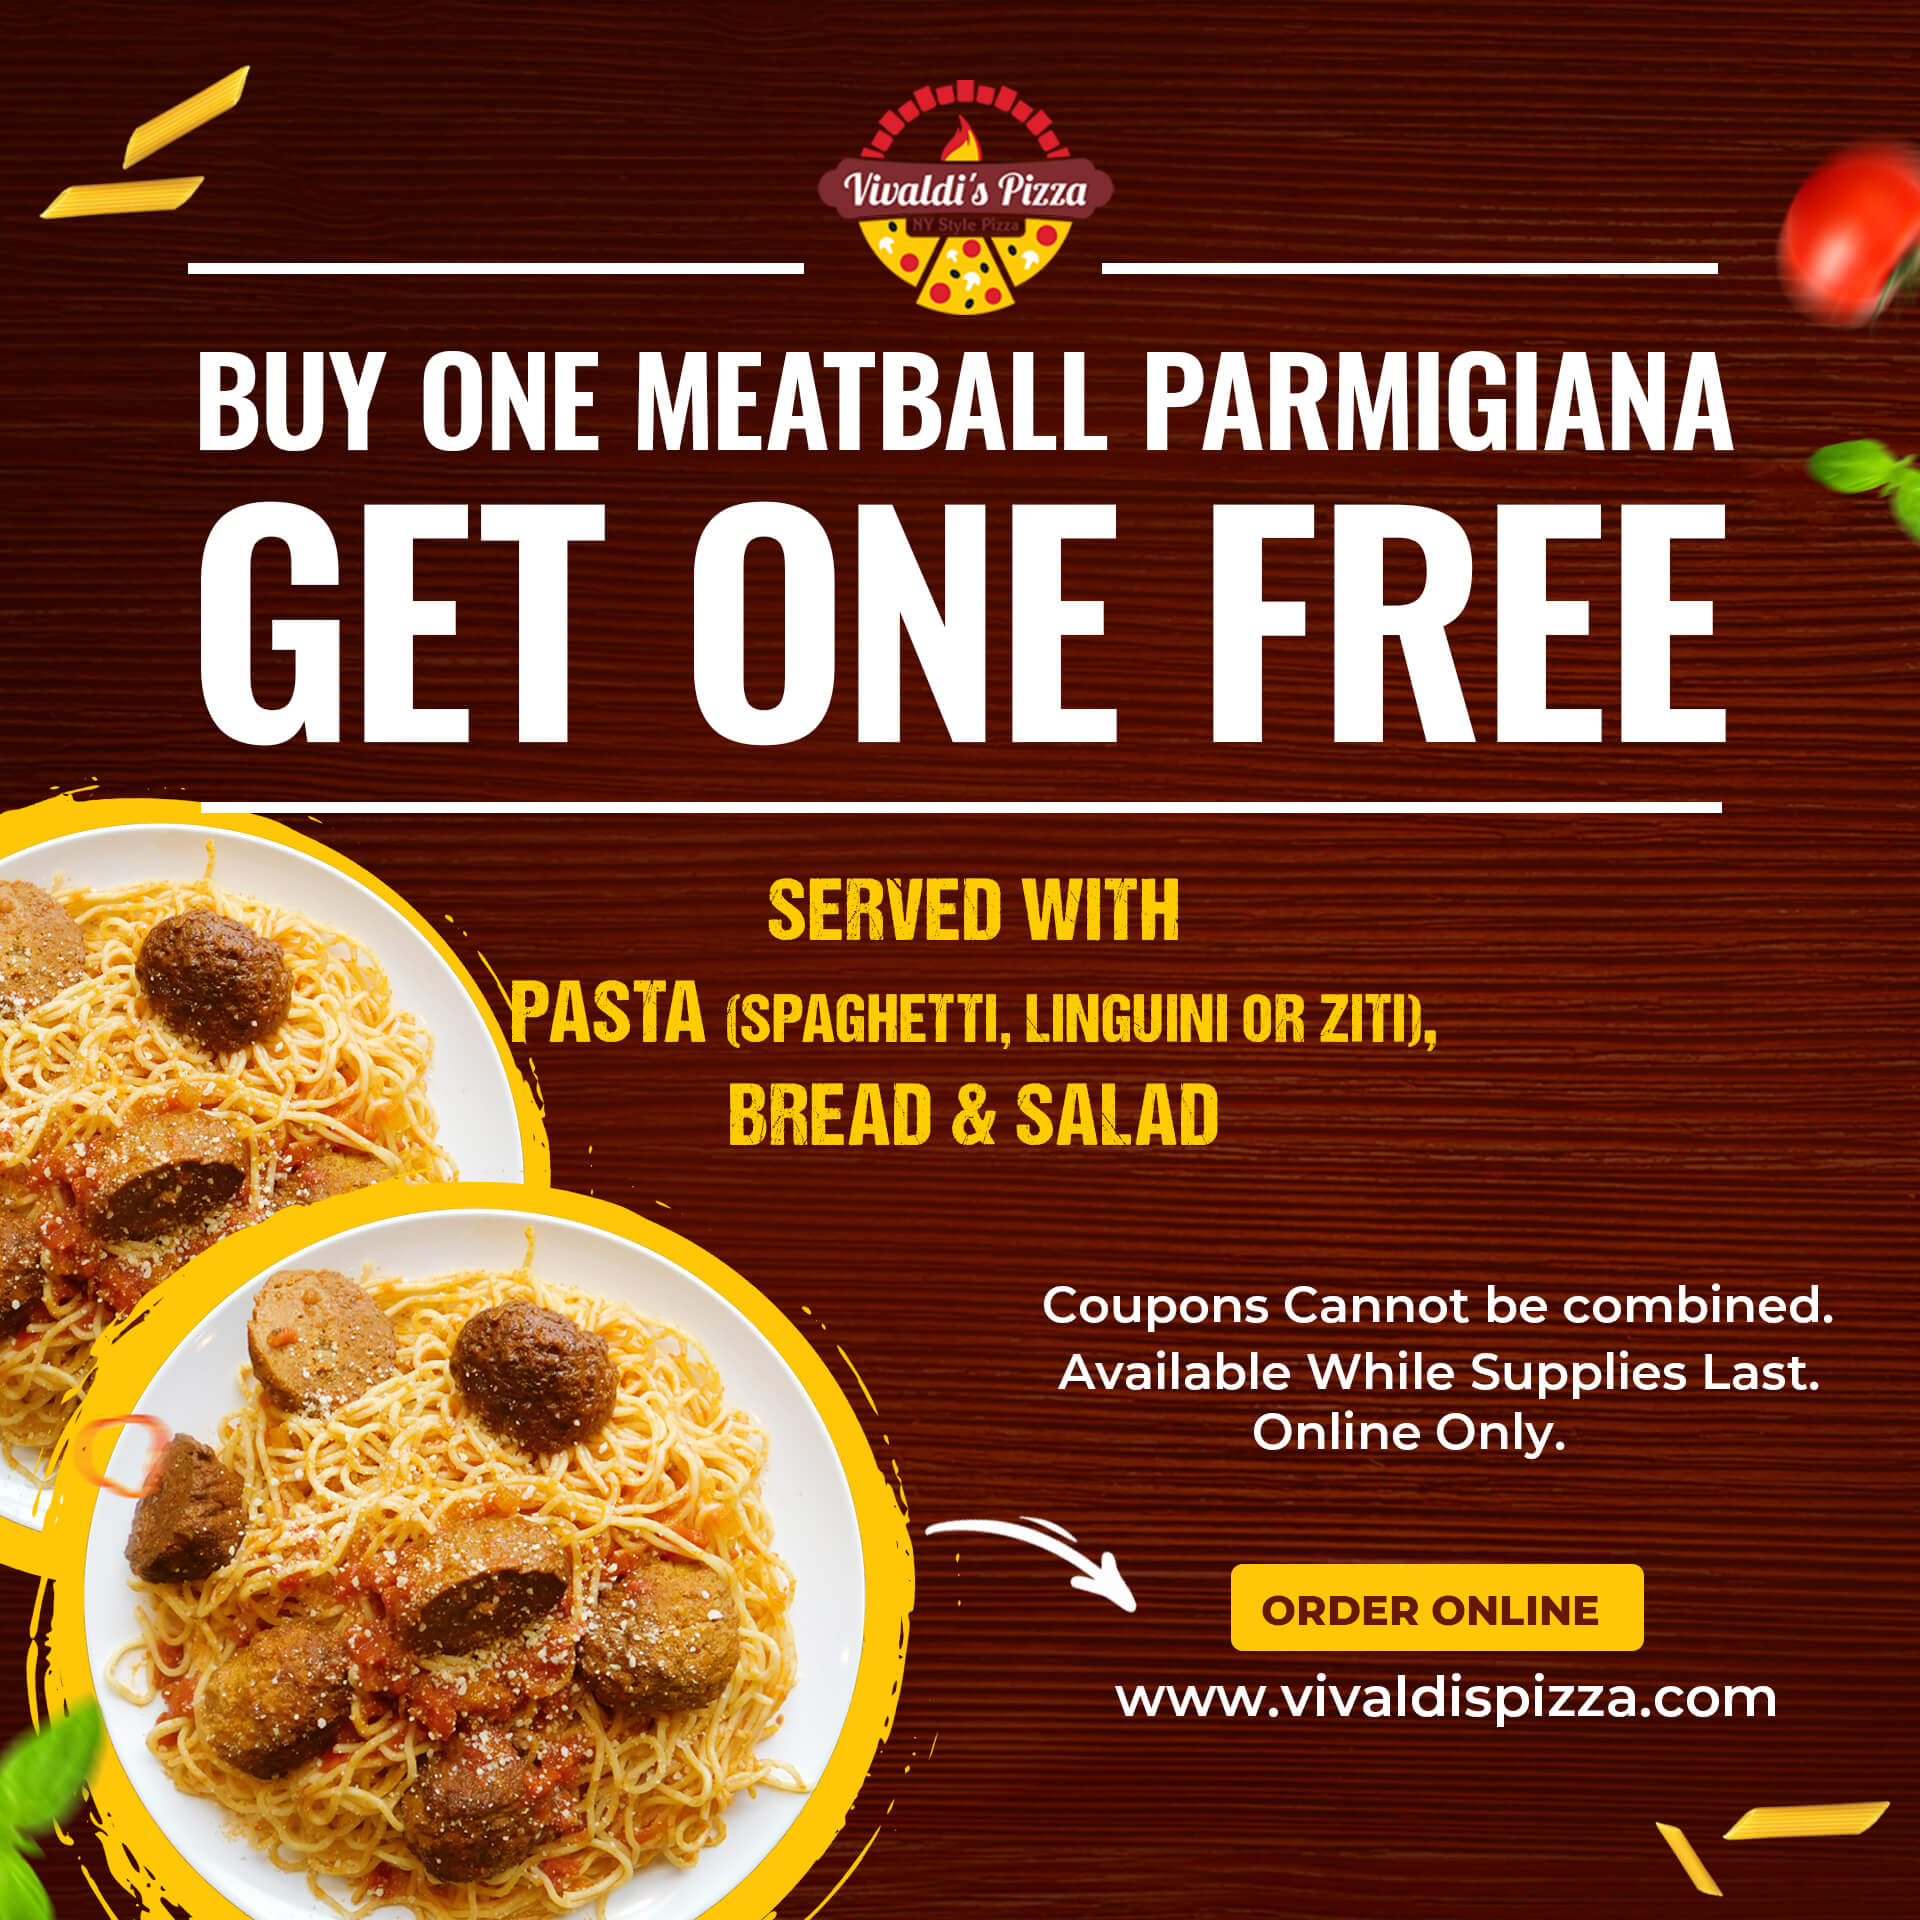 Buy One Meatball Parmigiana Get One Free!